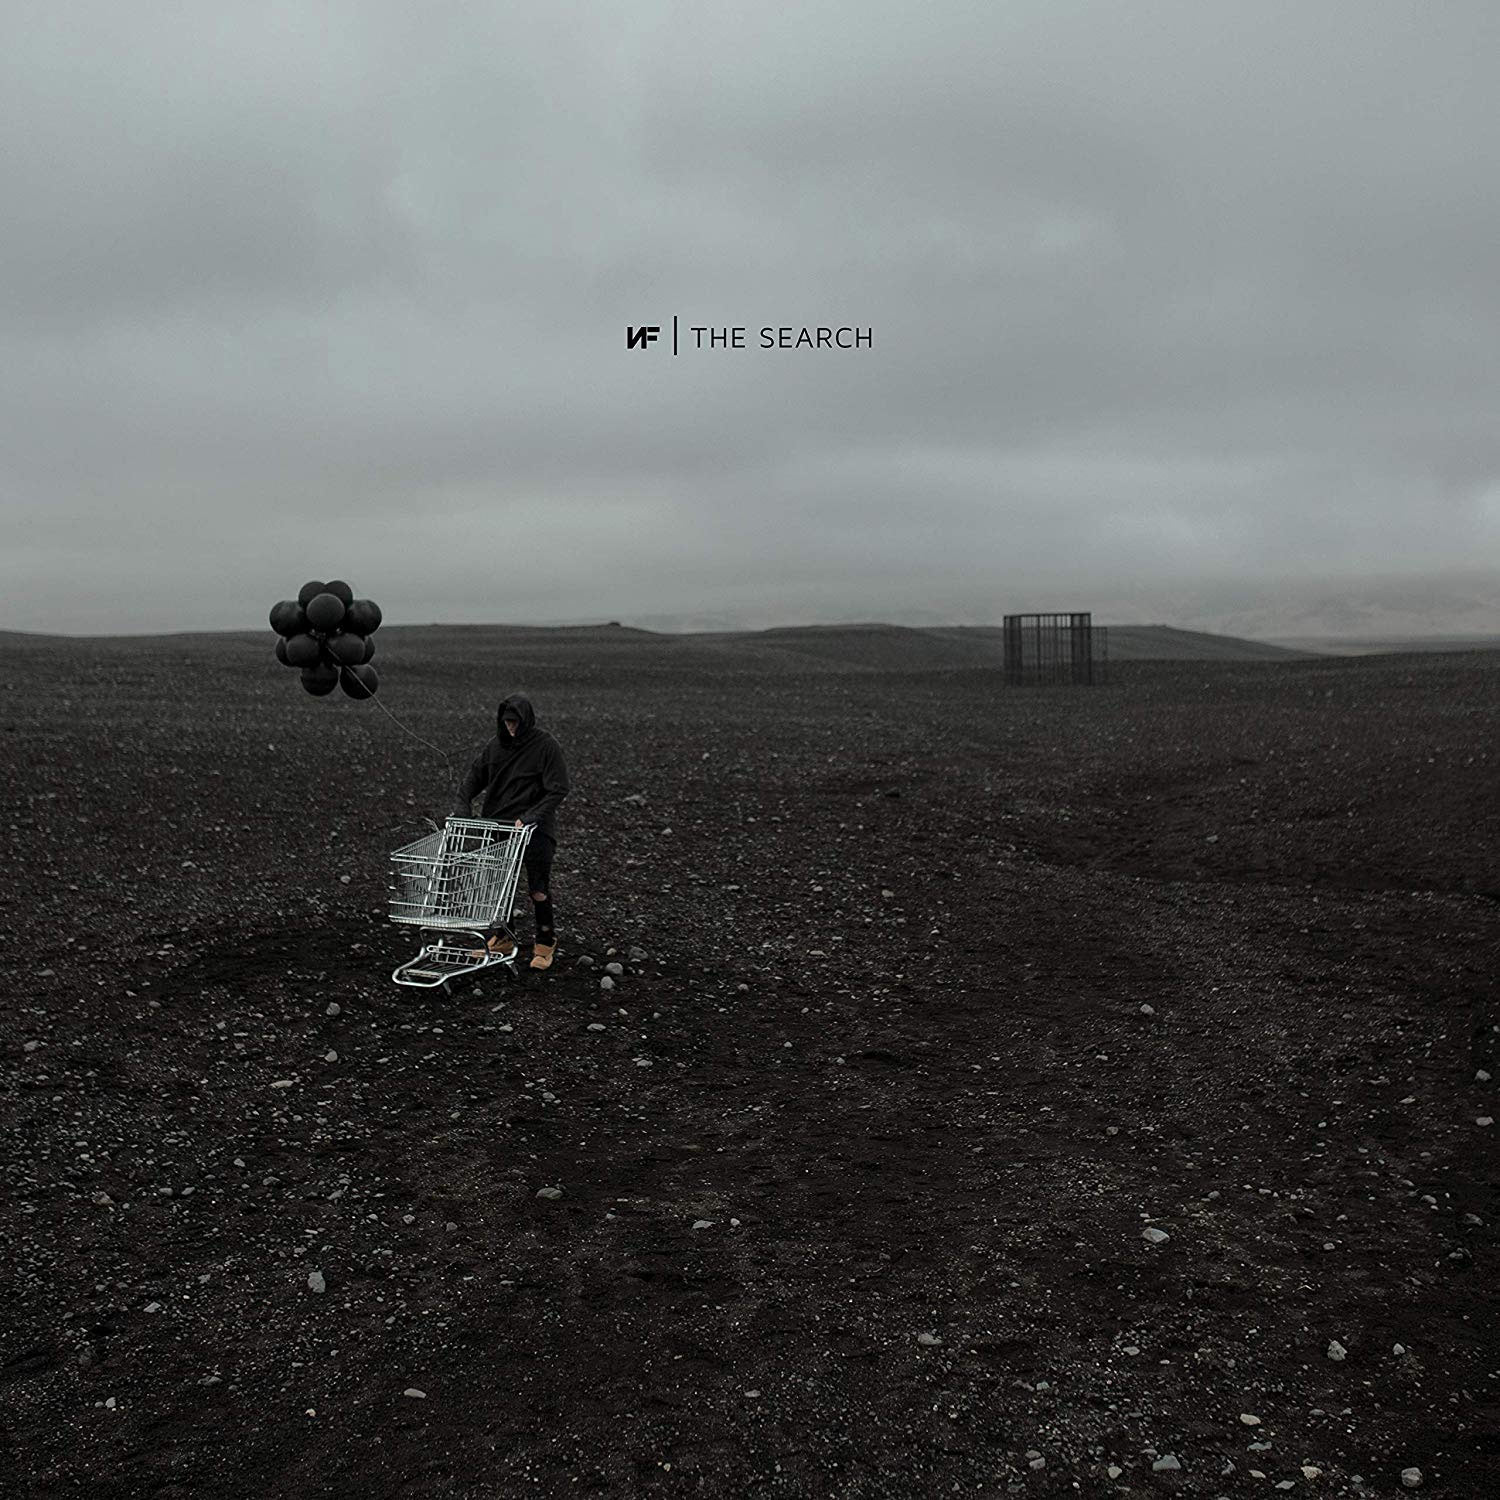 nf the search mp3 download